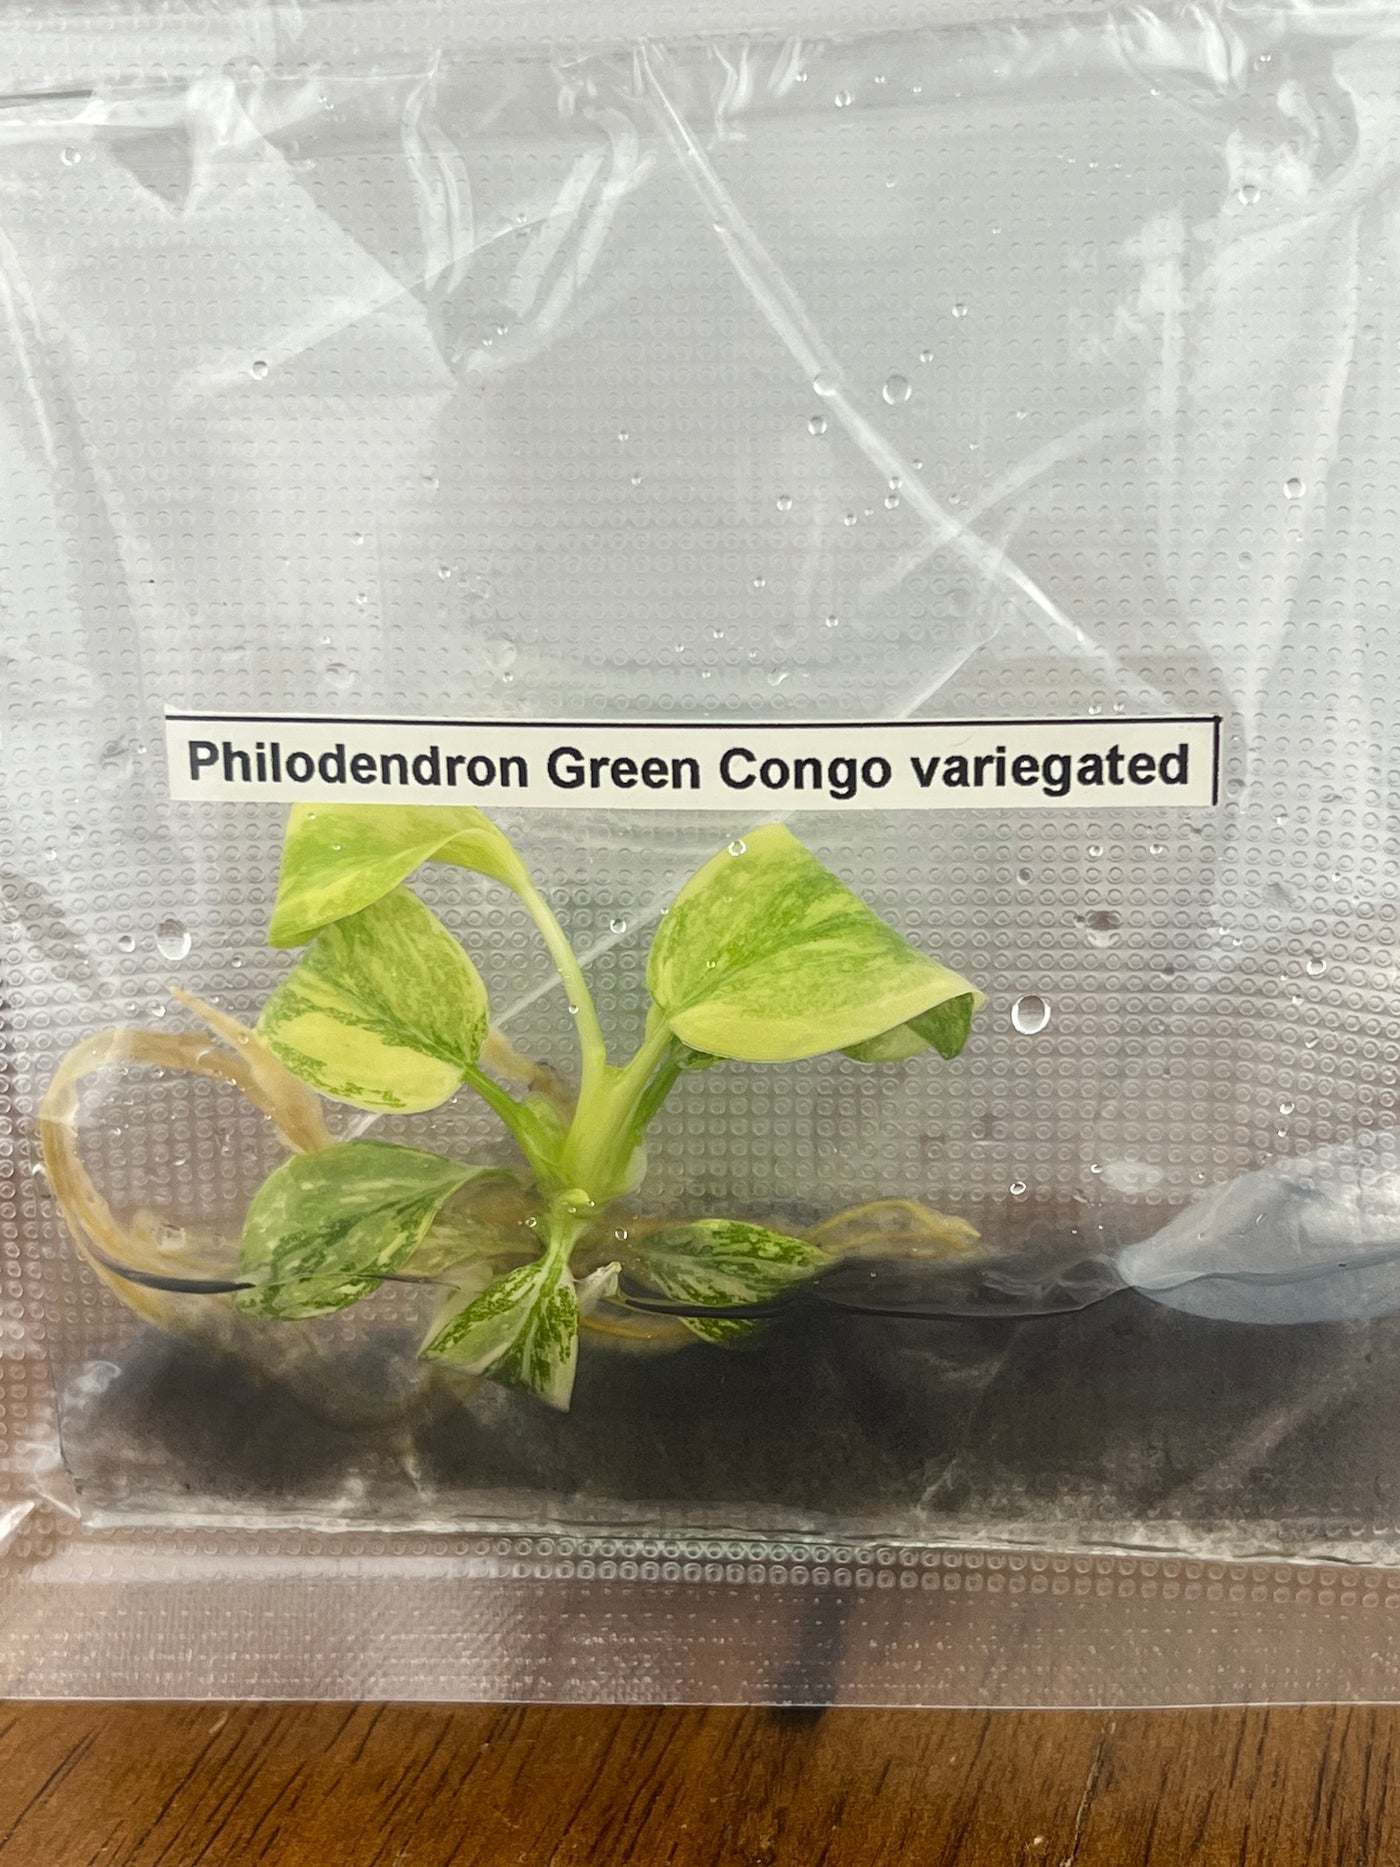 Philodendron Variegated Green Congo (Nuclear) Plantlet (1)